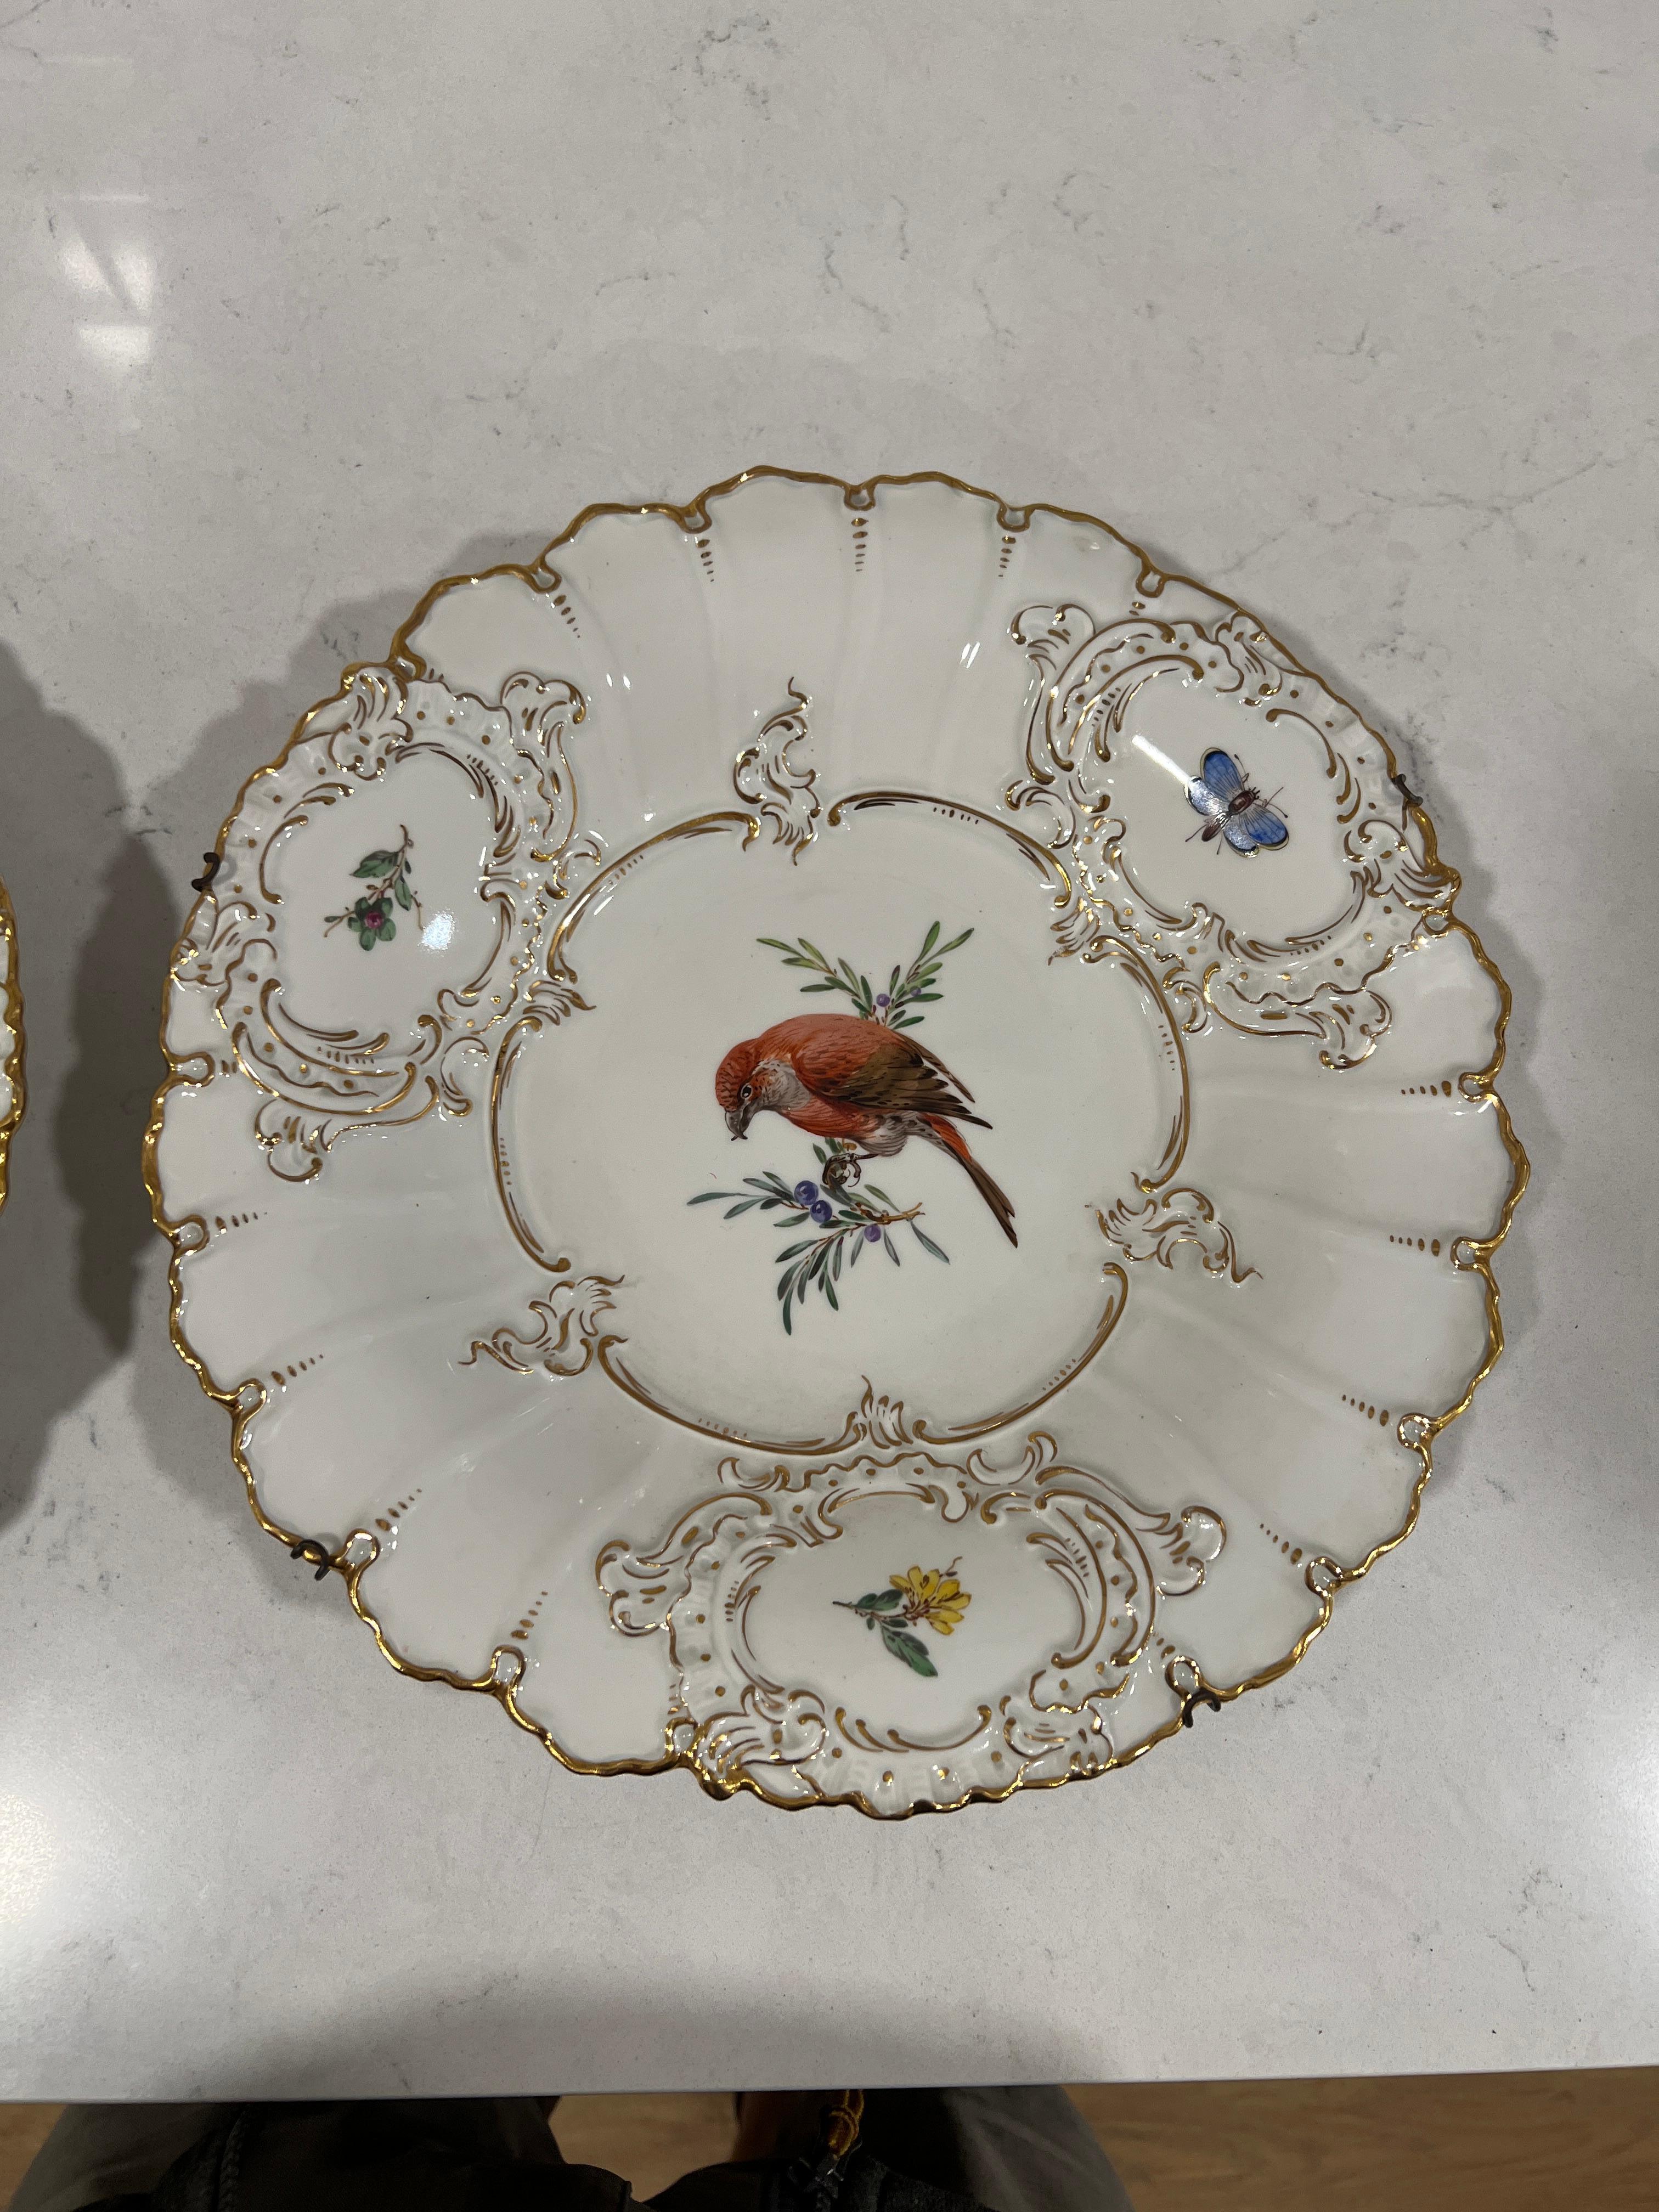 Meissen (German, founded 1710), 20th century.

A pair of fine quality porcelain chargers depicting two hand painted birds. Each centralized ornithological bird perched on a branch is surrounded by fine gilding, three windows (two each showing